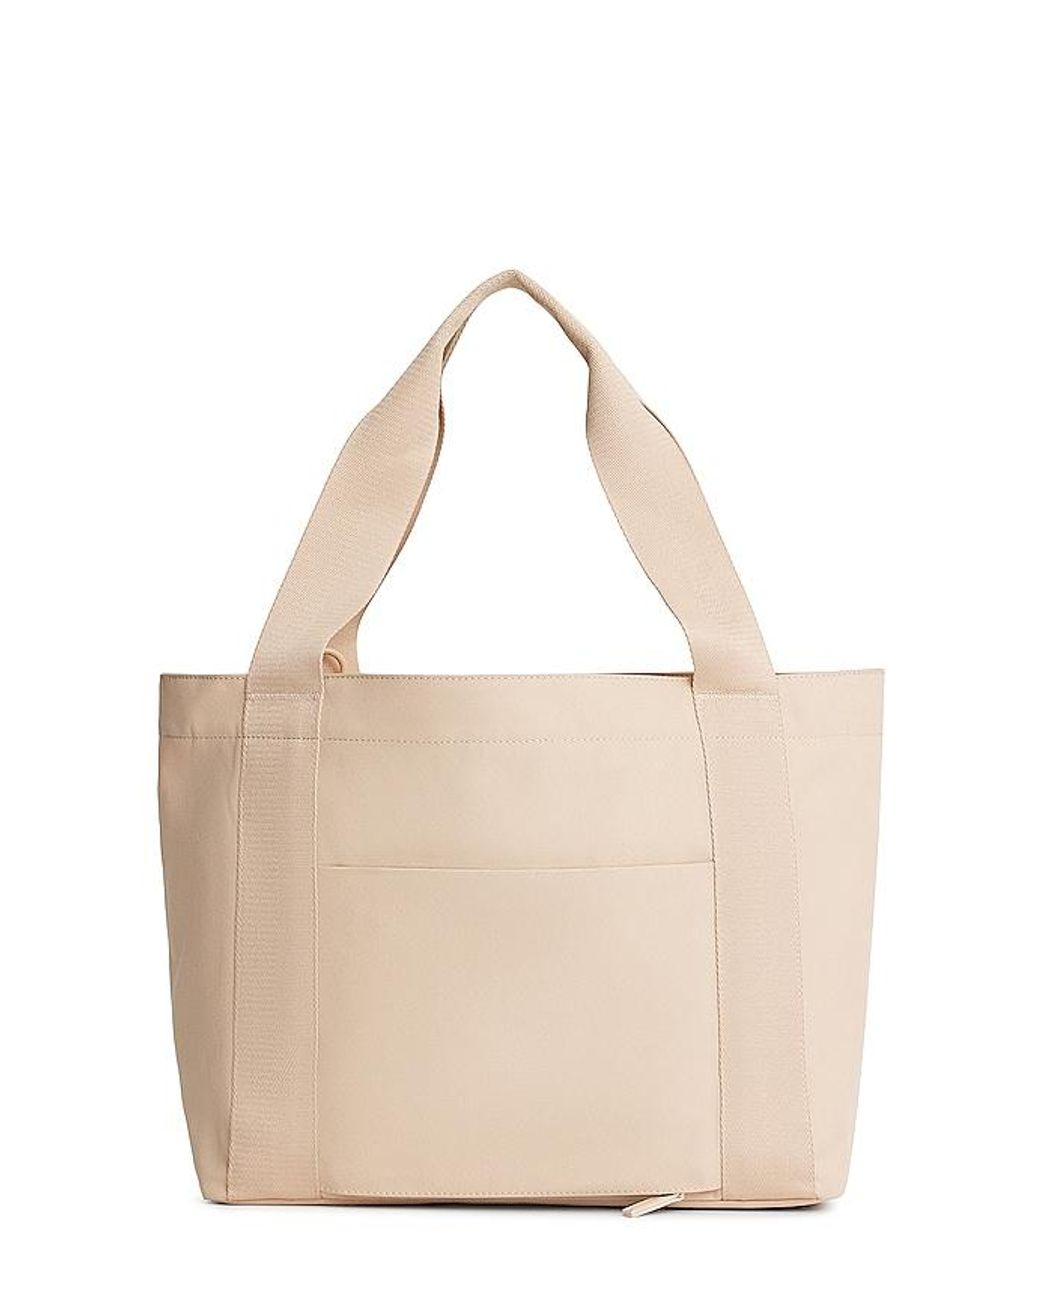 BEIS Ic Tote in Natural | Lyst UK